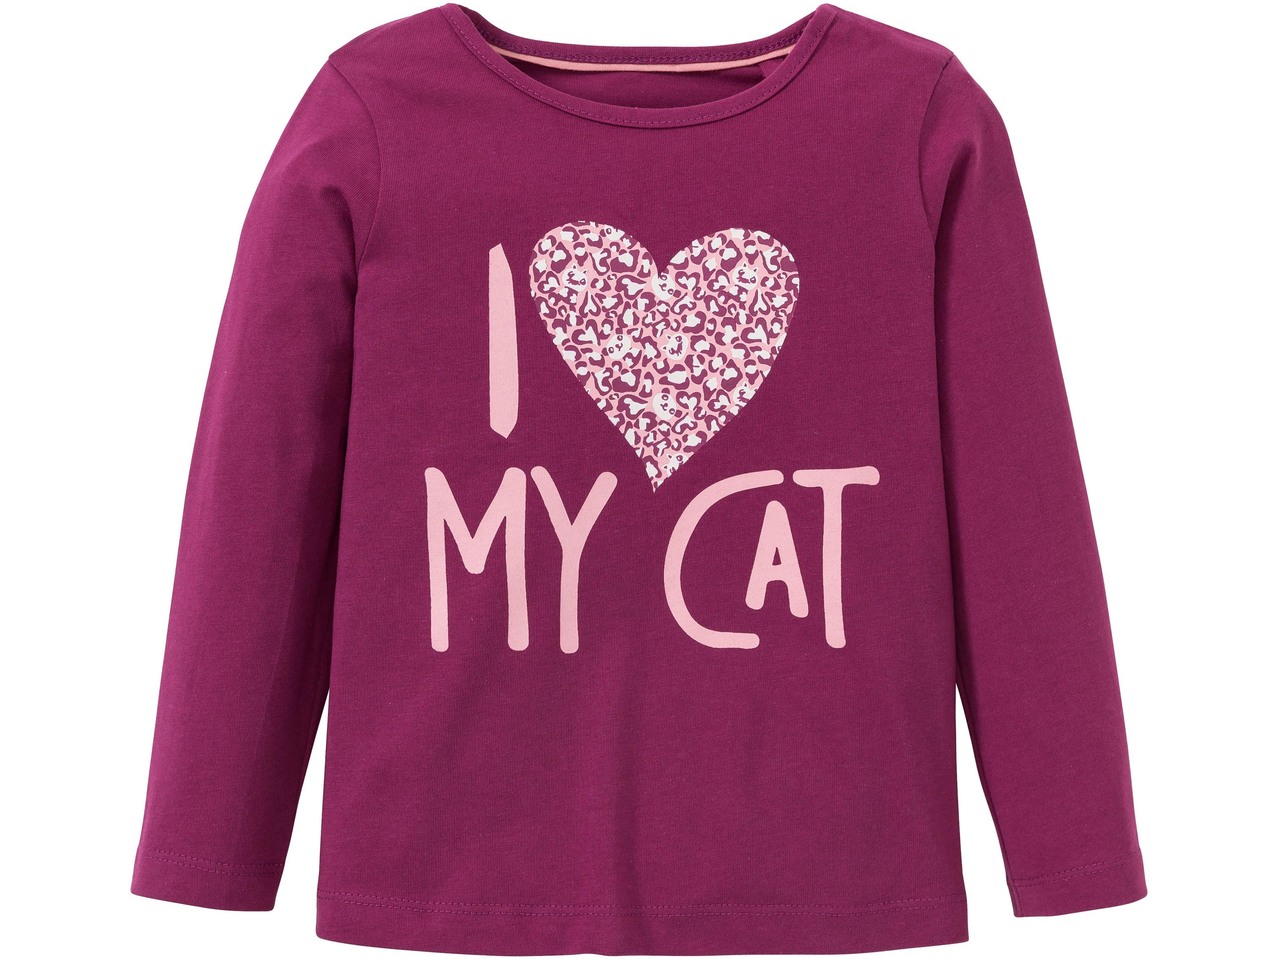 Girls' Long Sleeve Tops, 2 pieces